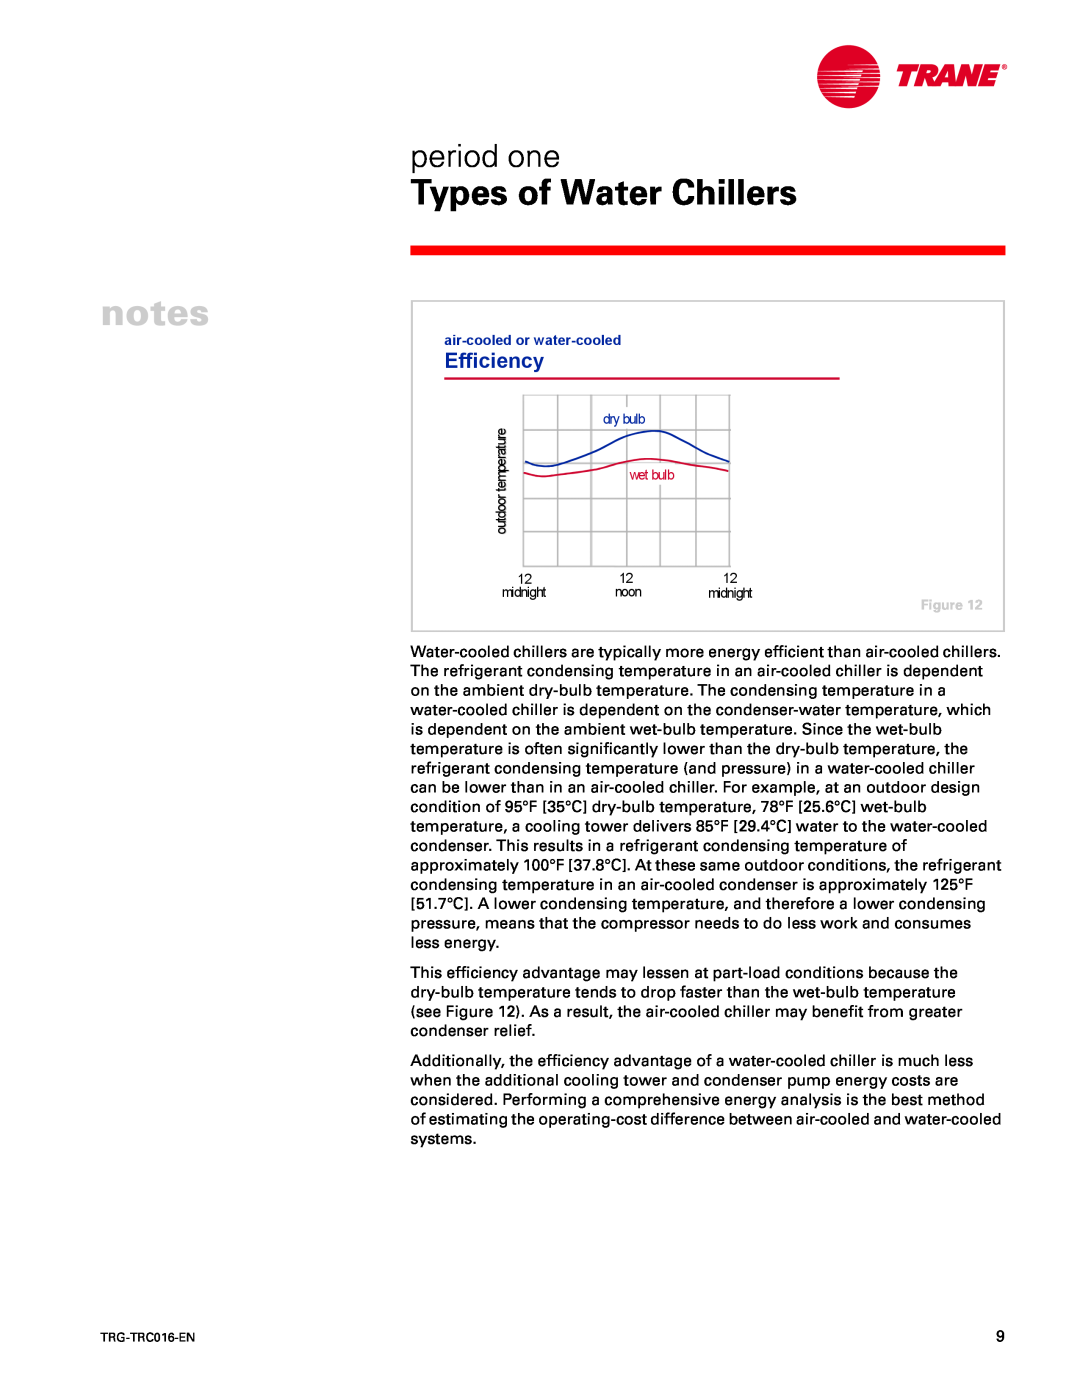 Trane TRG-TRC016-EN manual Efficiency, notes, Types of Water Chillers, period one 